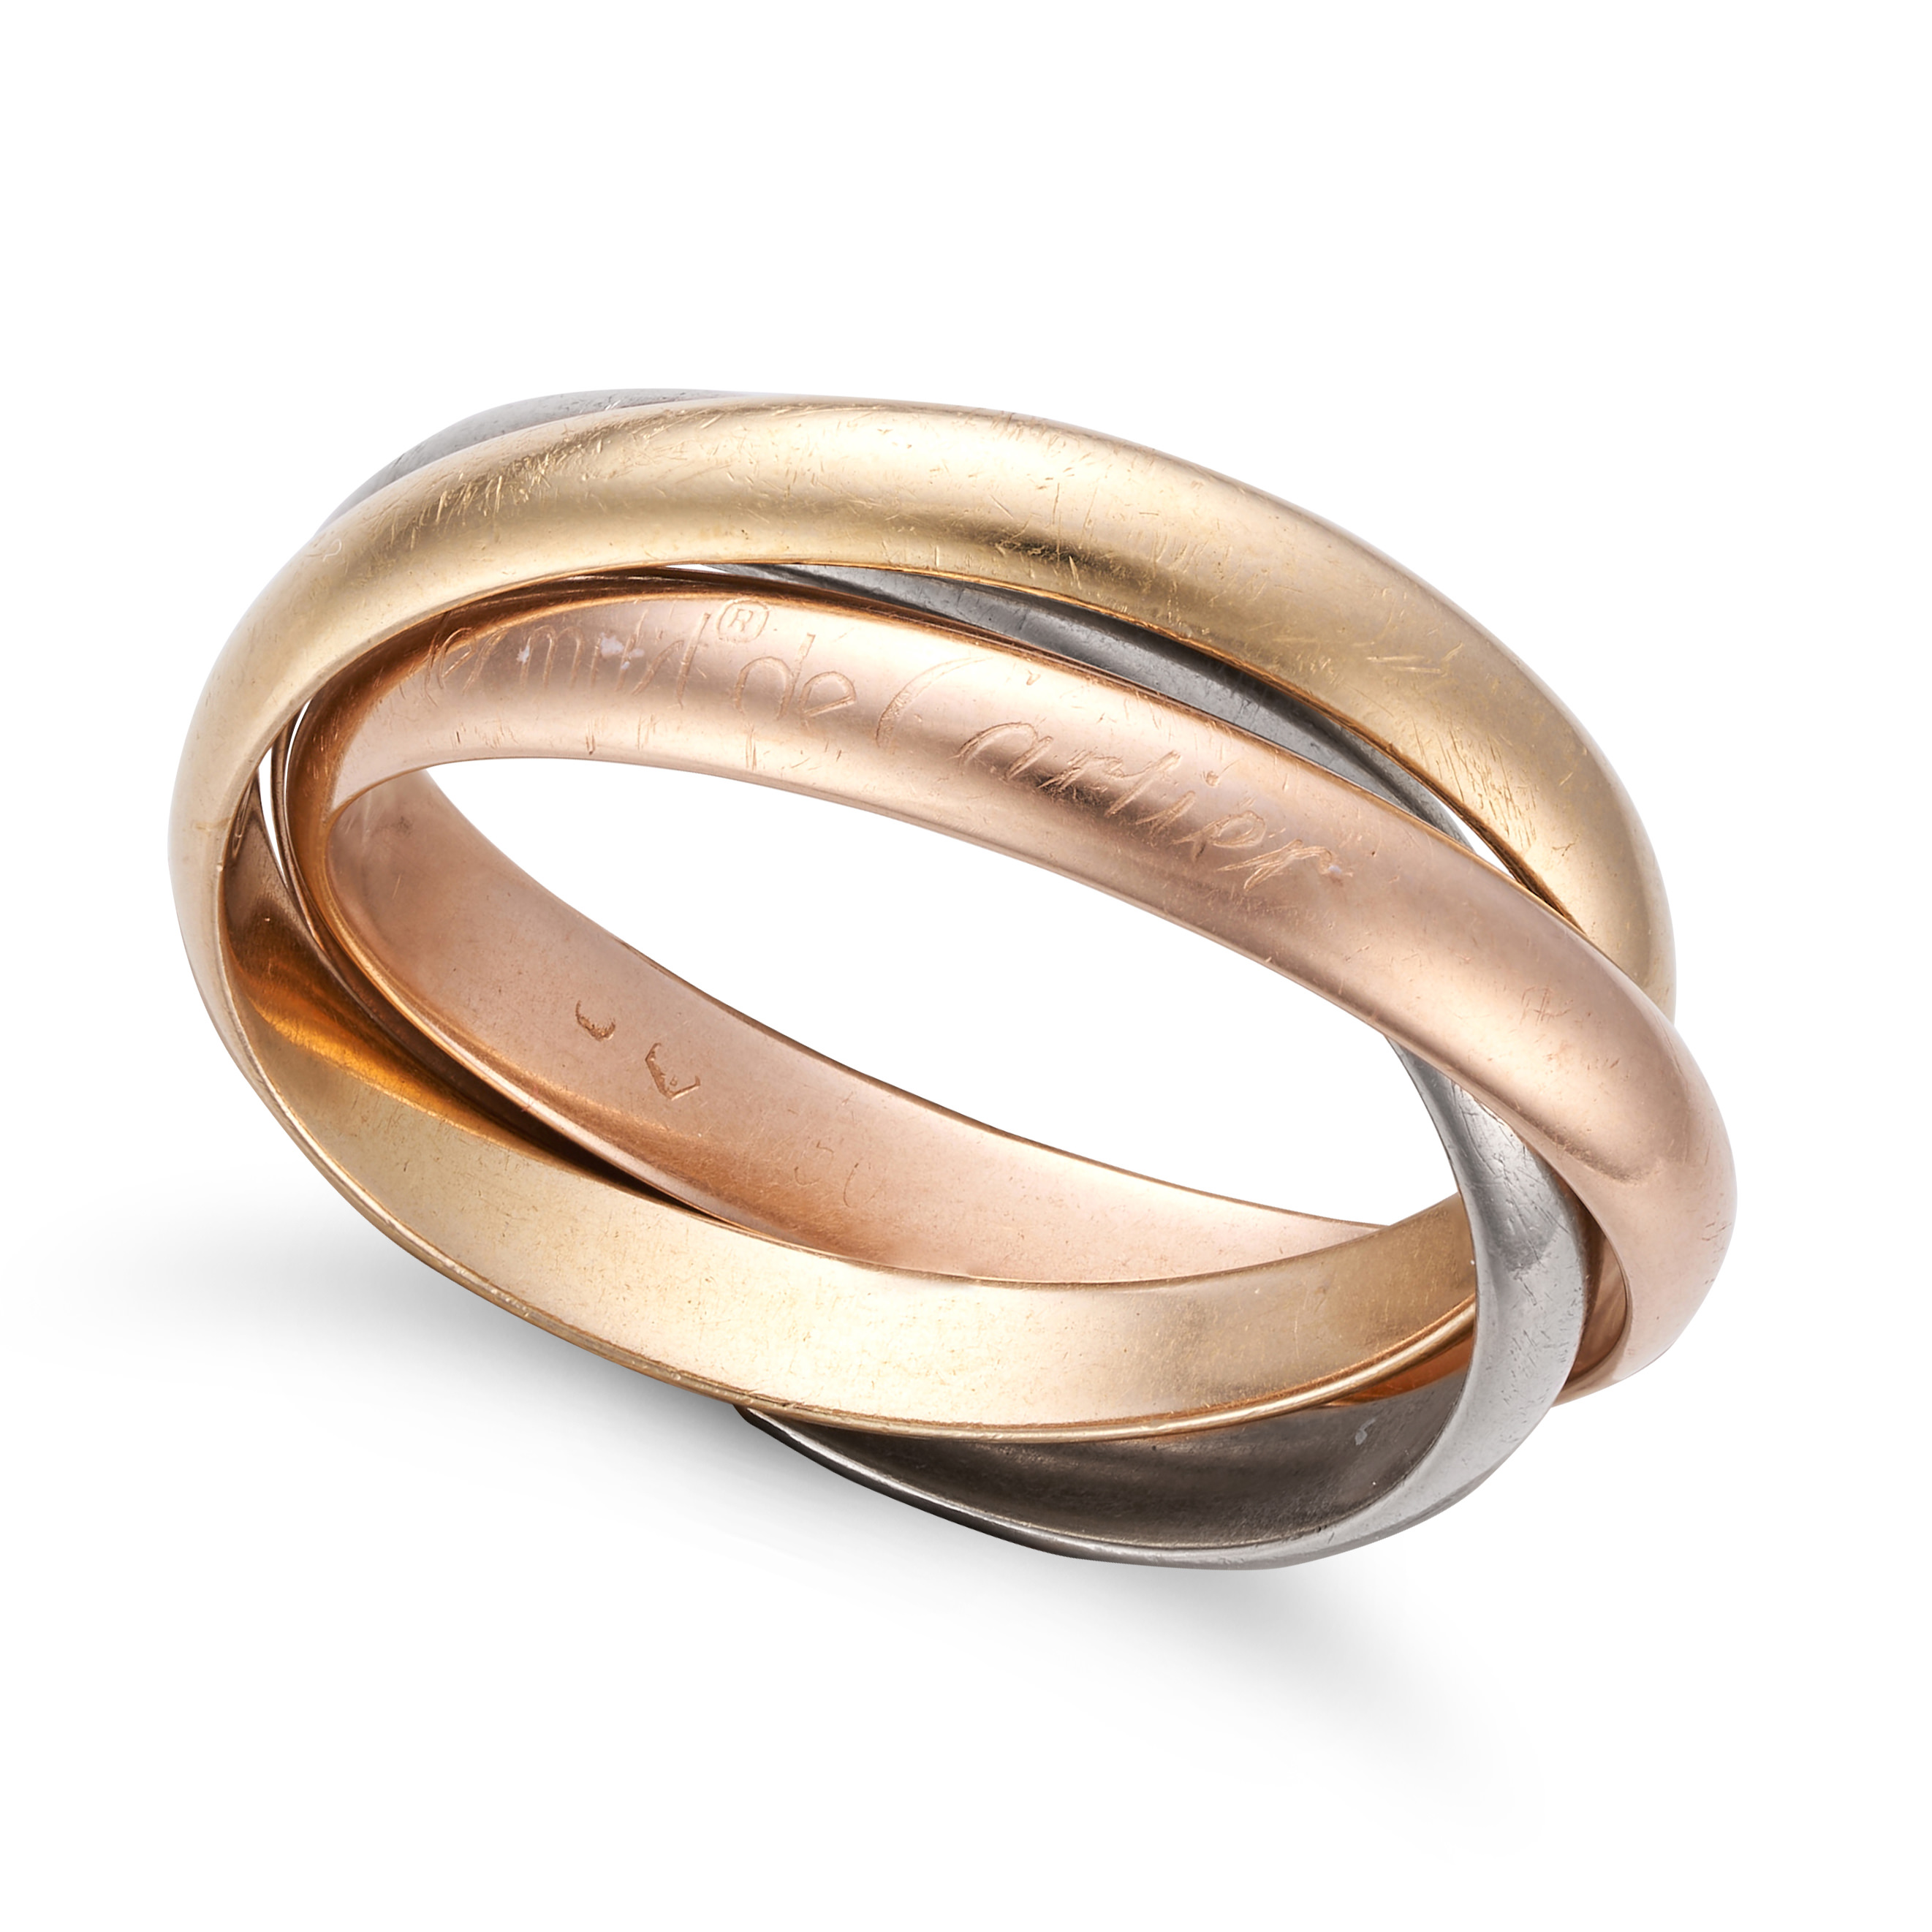 LES MUST DE CARTIER, A TRINITY RING in 18ct gold and platinum, comprising three interlocking band... - Image 2 of 4